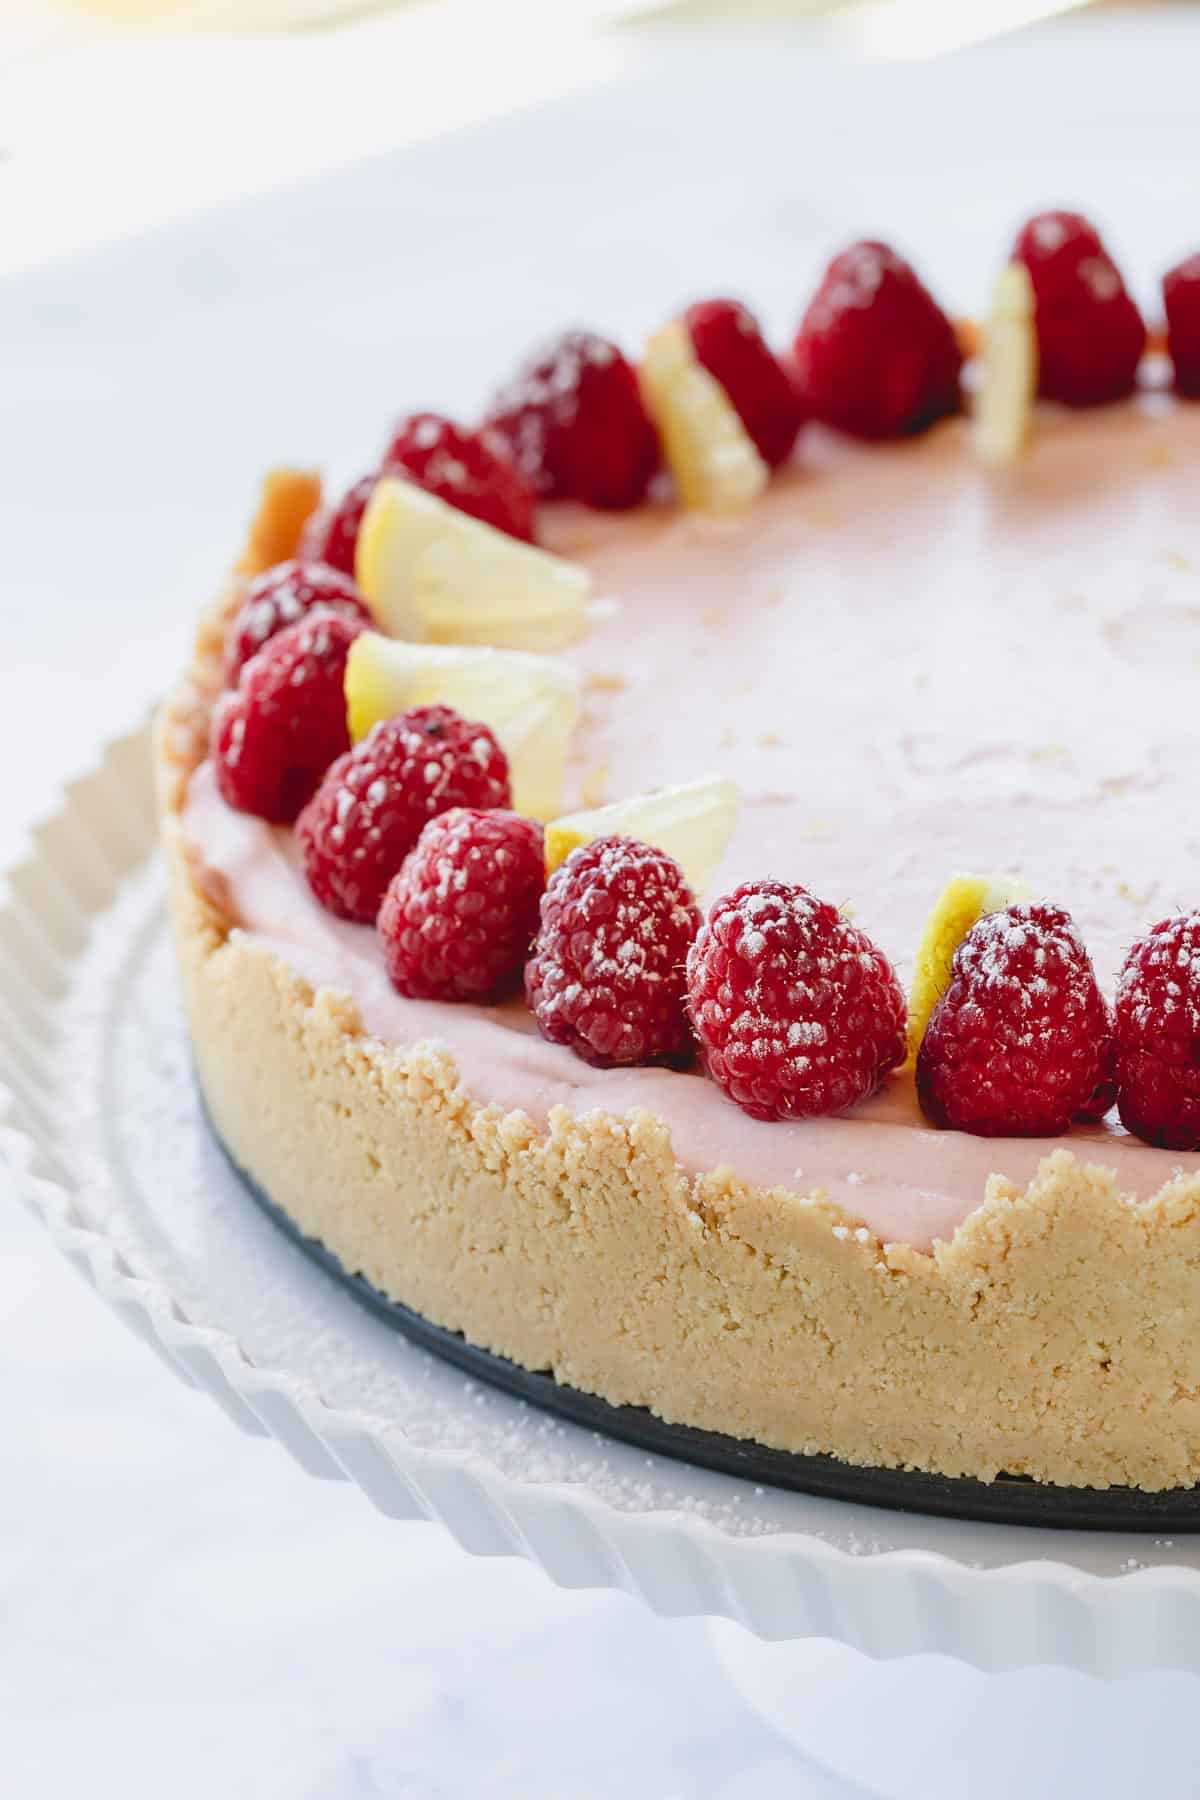 Creamy sweet and loaded with fresh berries, this lemon raspberry no bake ch...